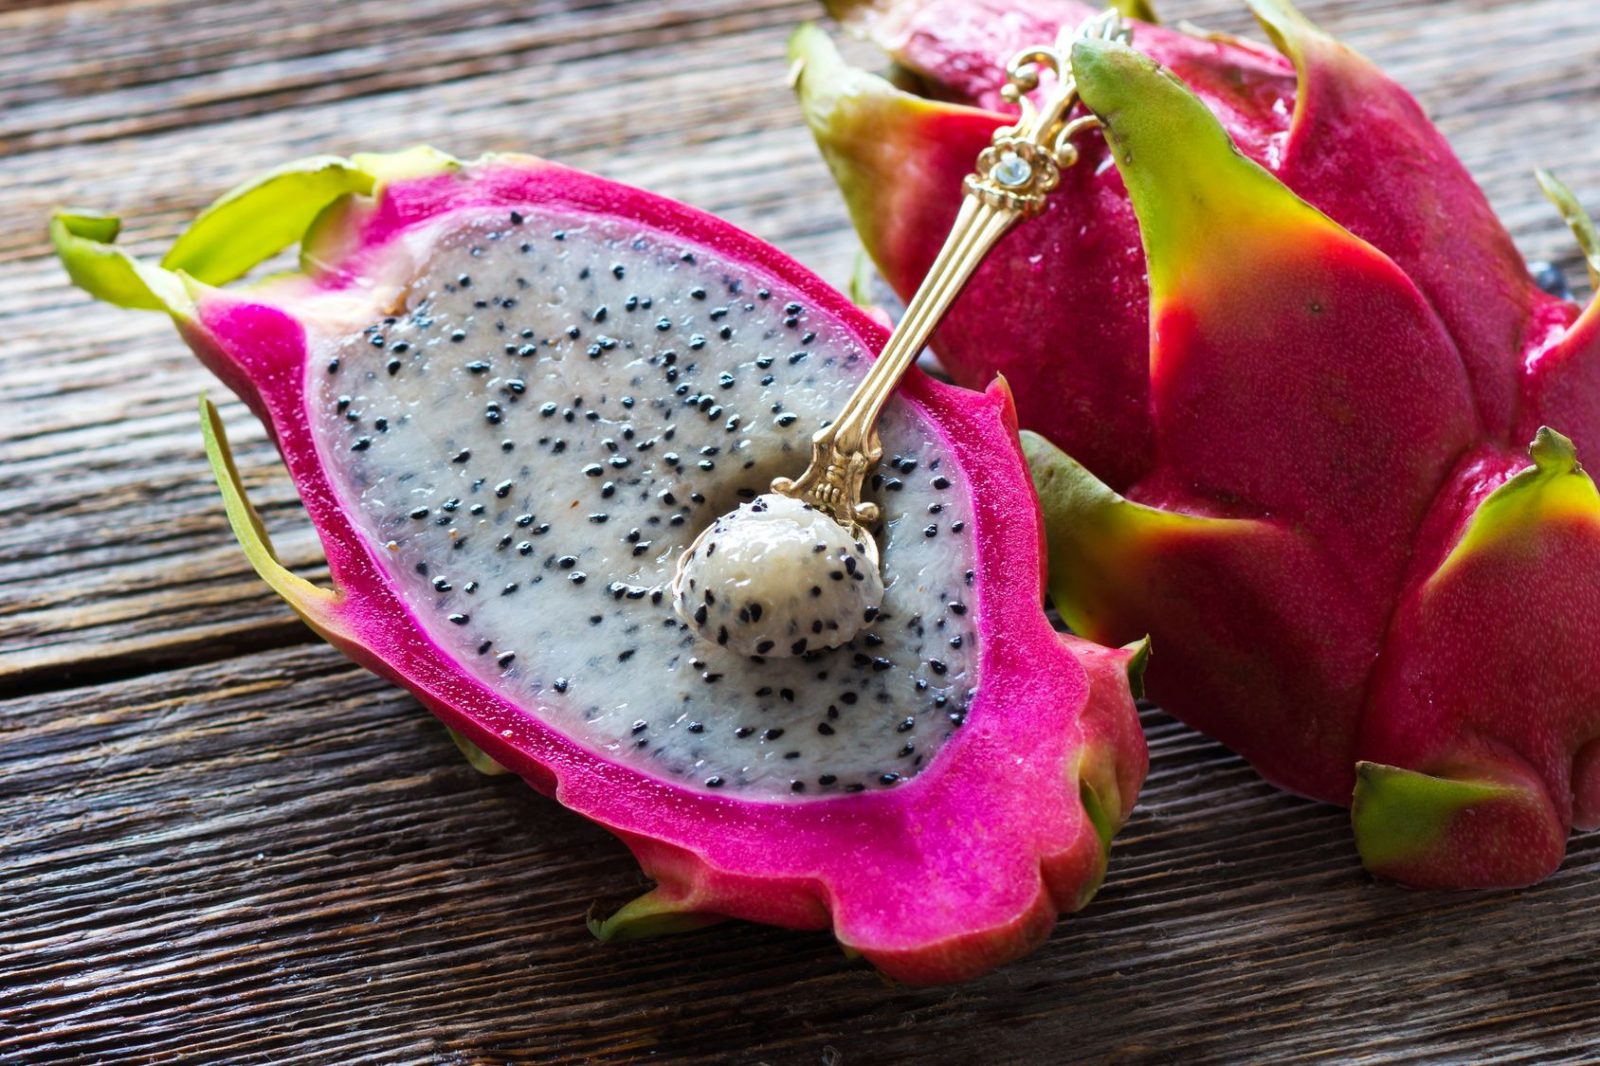 🍍 You Haven’t Really Lived Unless You’ve Tried at Least 12 of These Tropical Fruits Dragonfruit